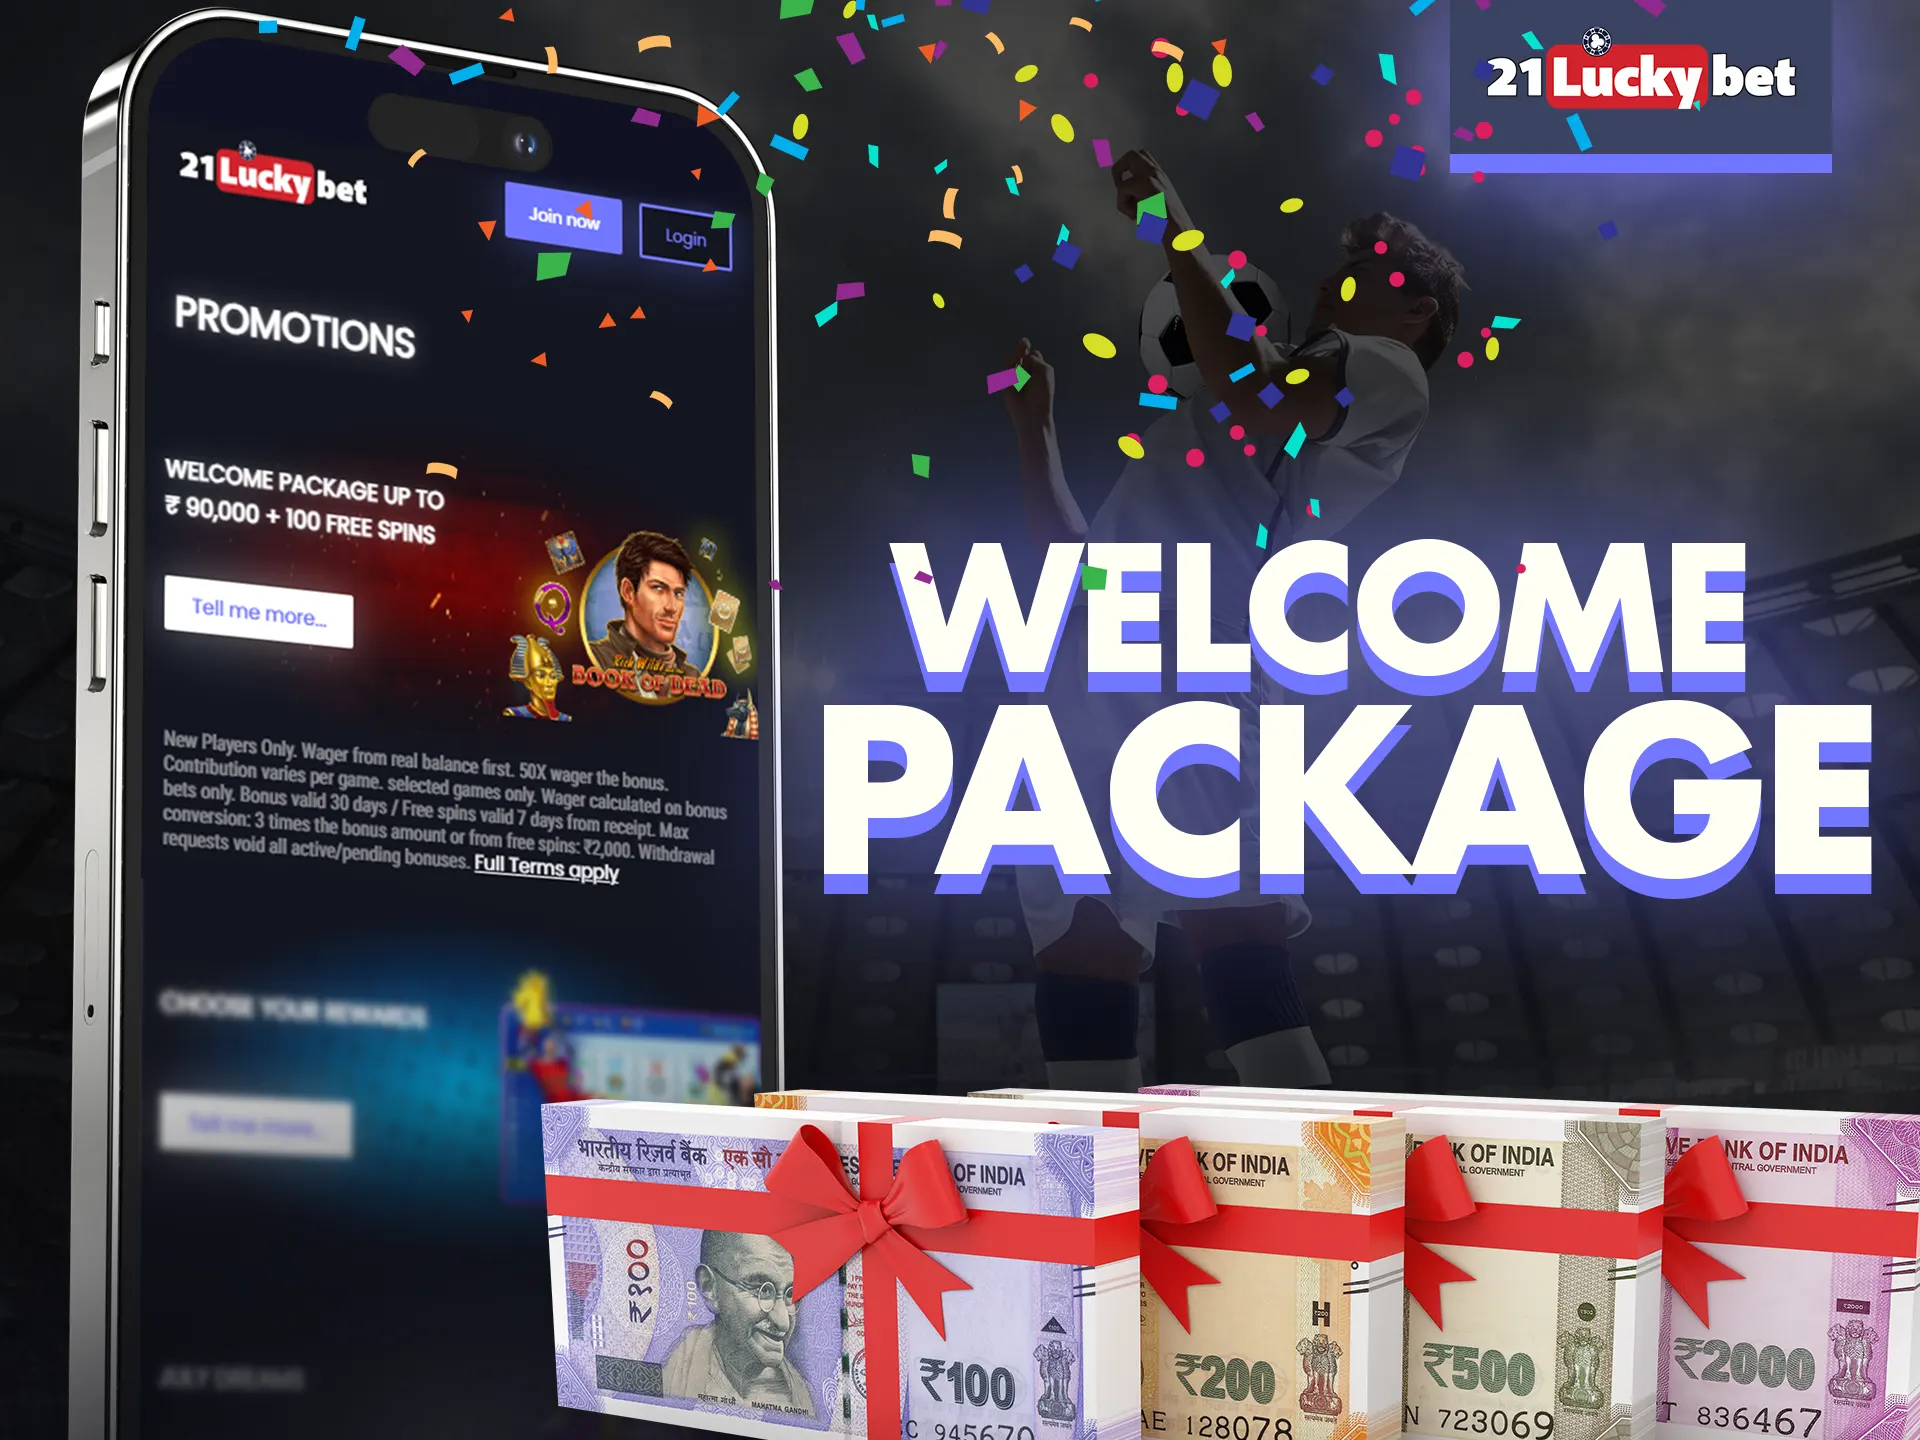 Get a special welcome package from 21luckybet app.